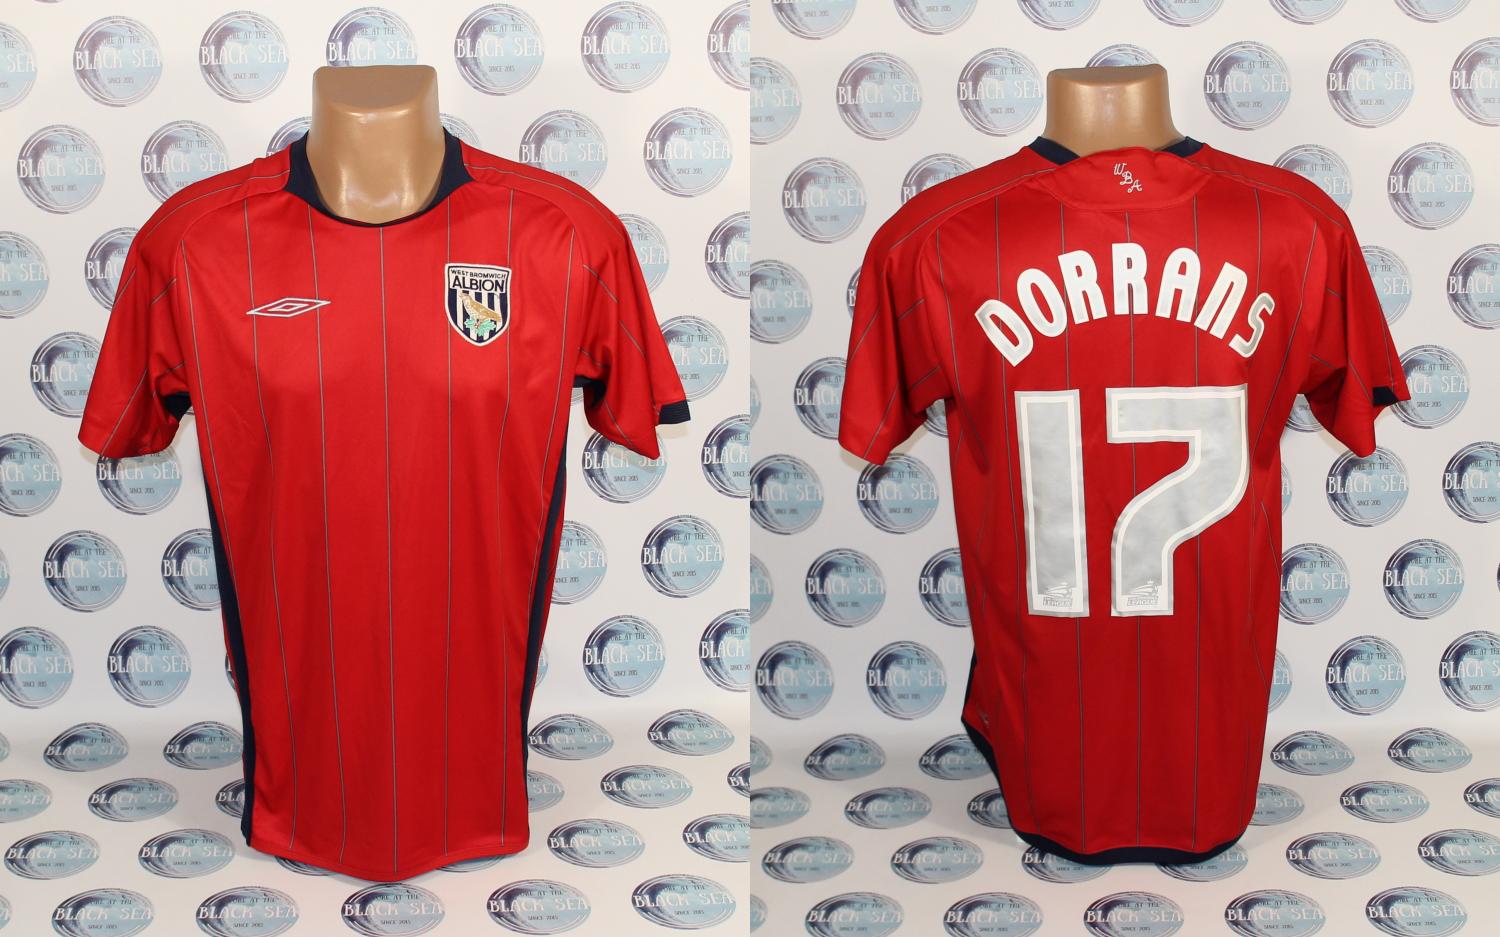 West Bromwich Albion Away football shirt 2009 - 2010. Sponsored by no ...